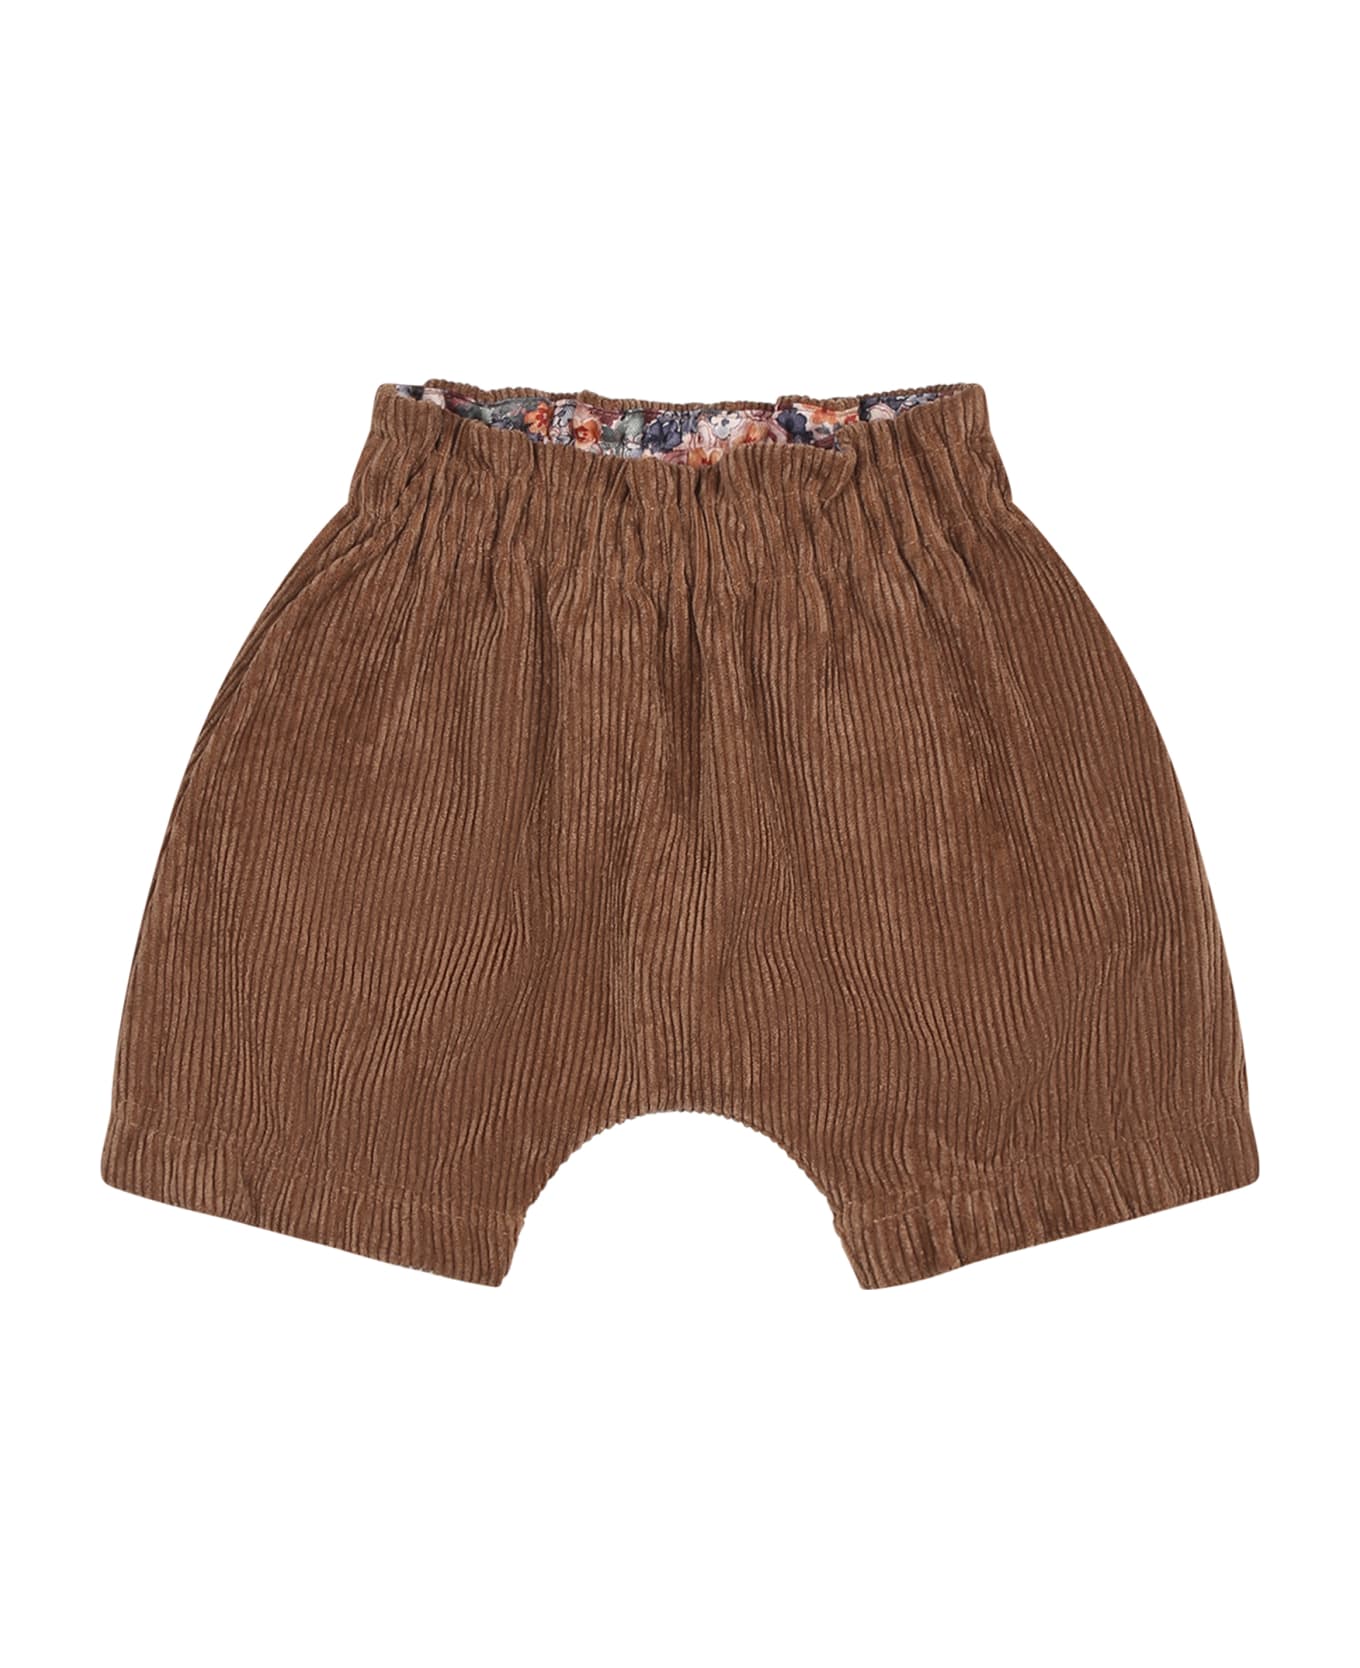 Caffe' d'Orzo Brown Shorts For Baby Girl - Brown ボトムス